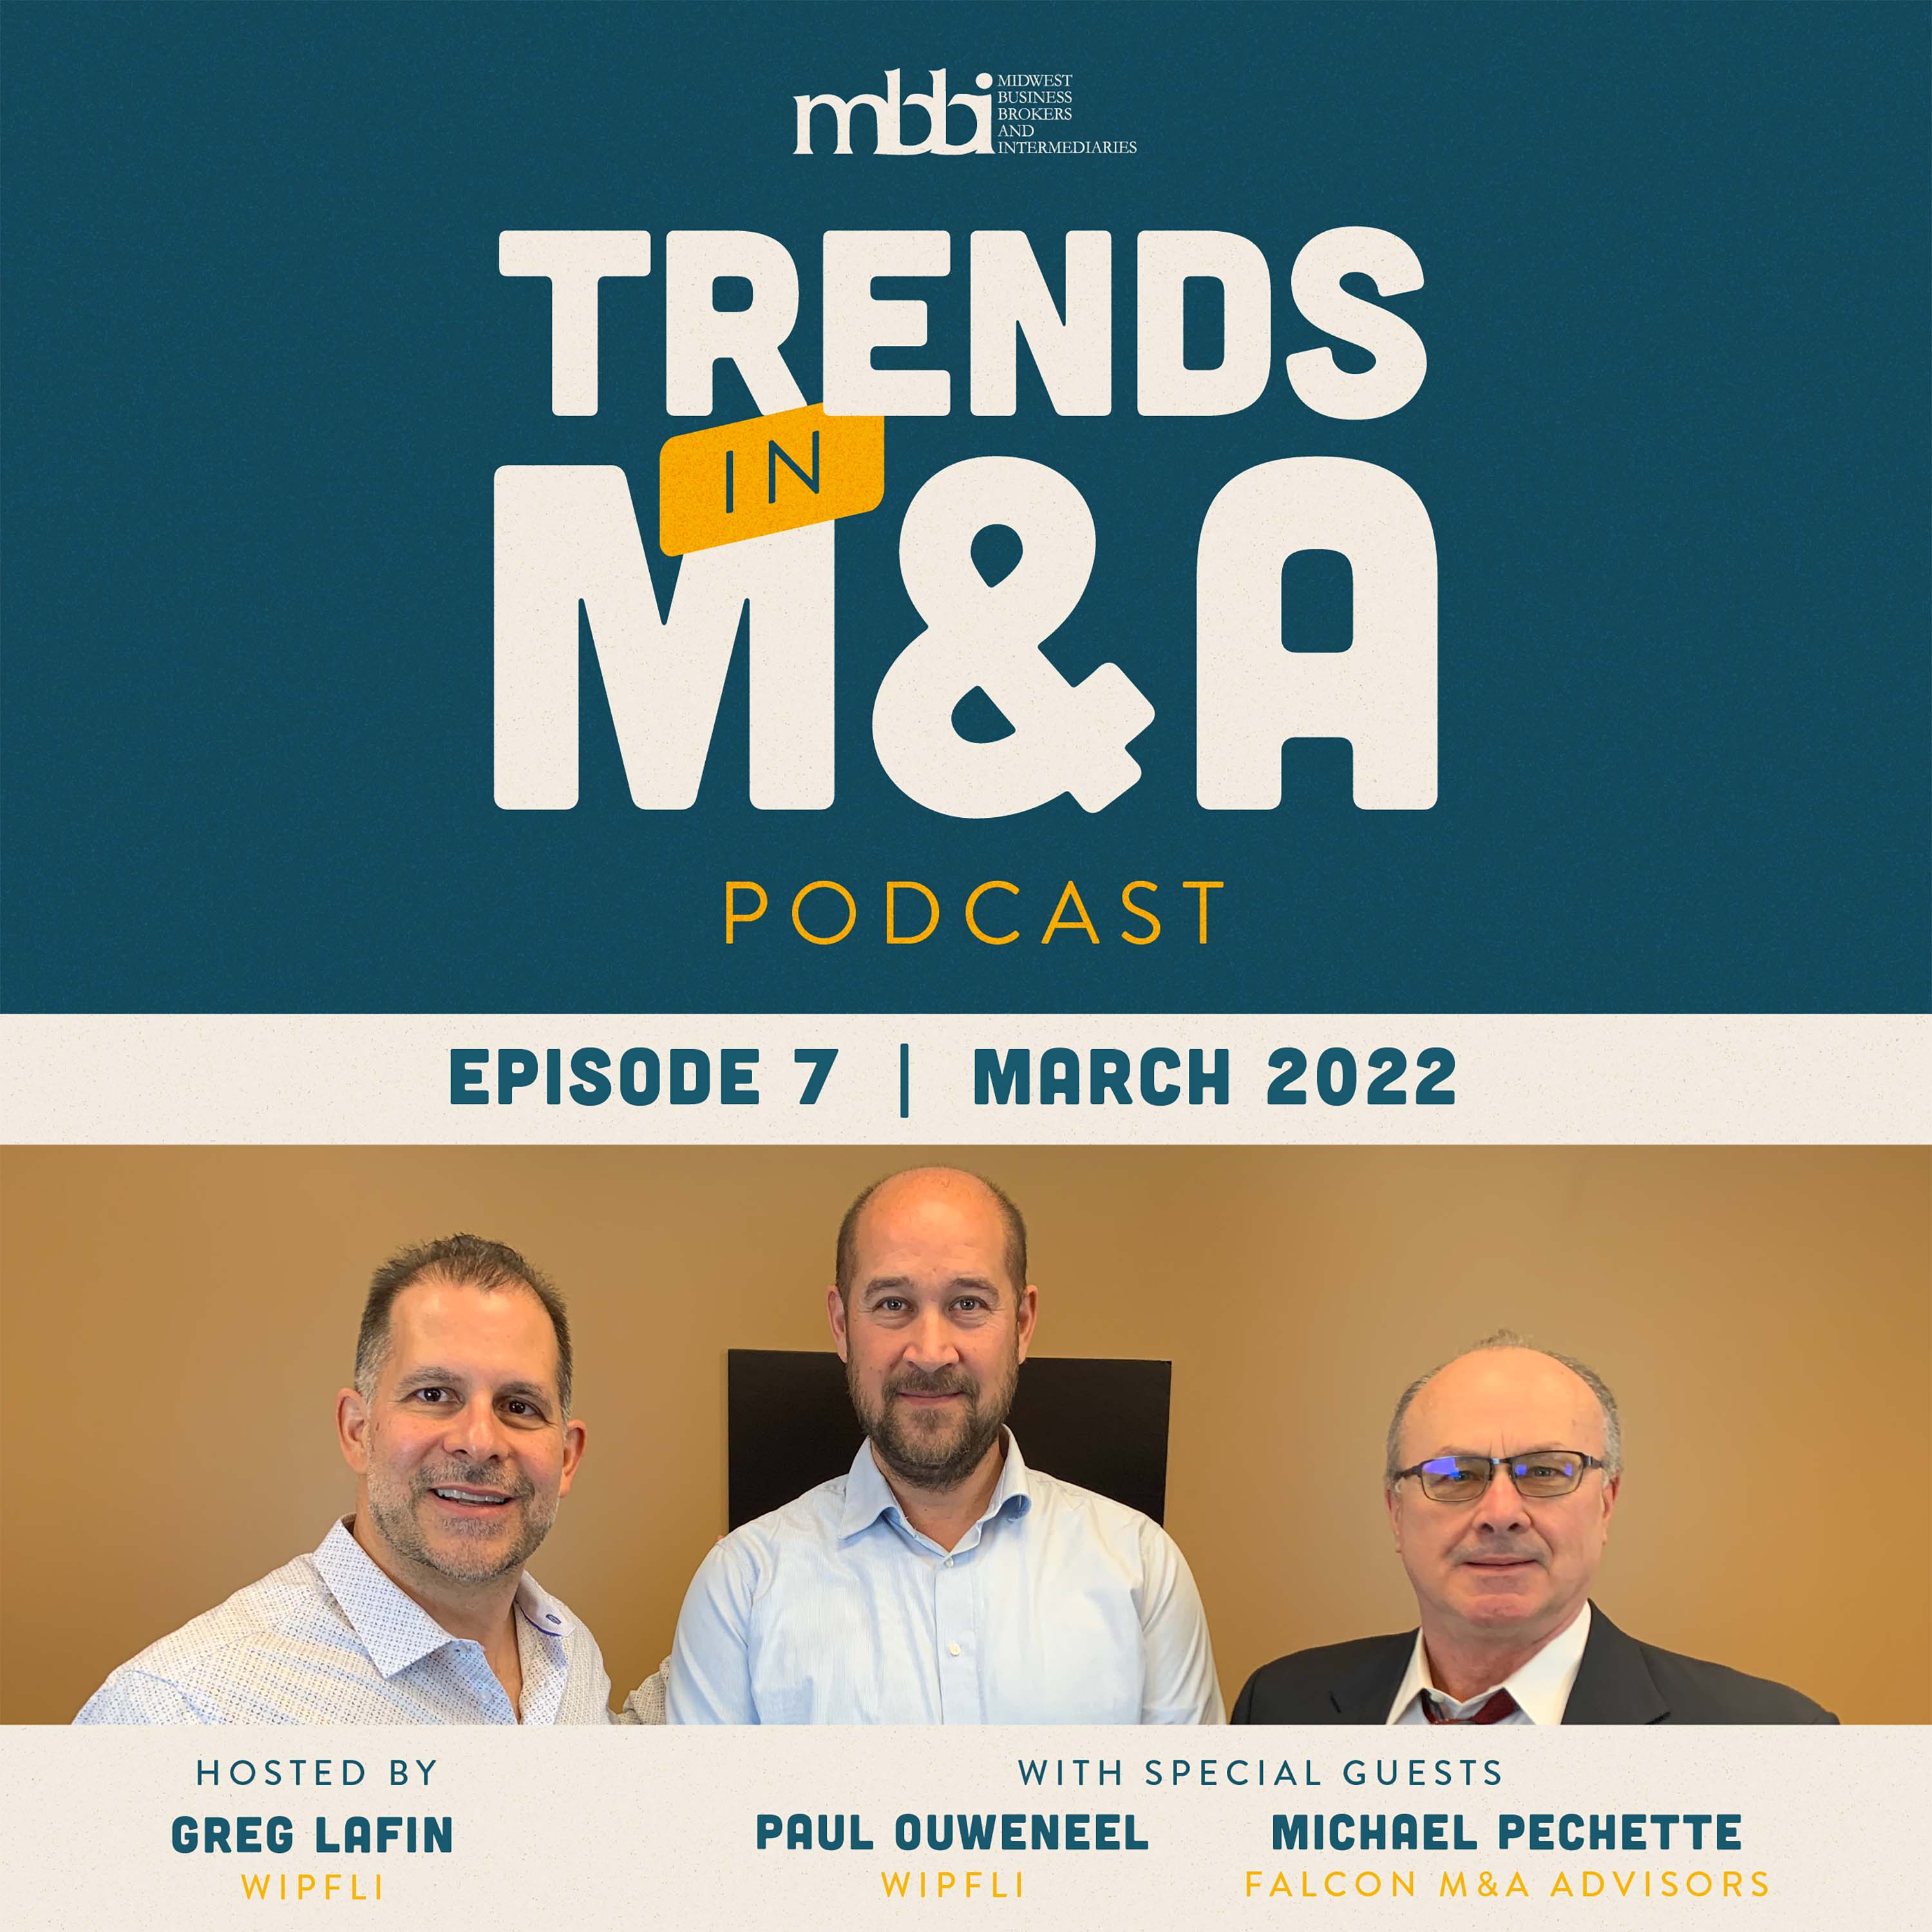 Artwork for podcast MBBI Trends in M&A